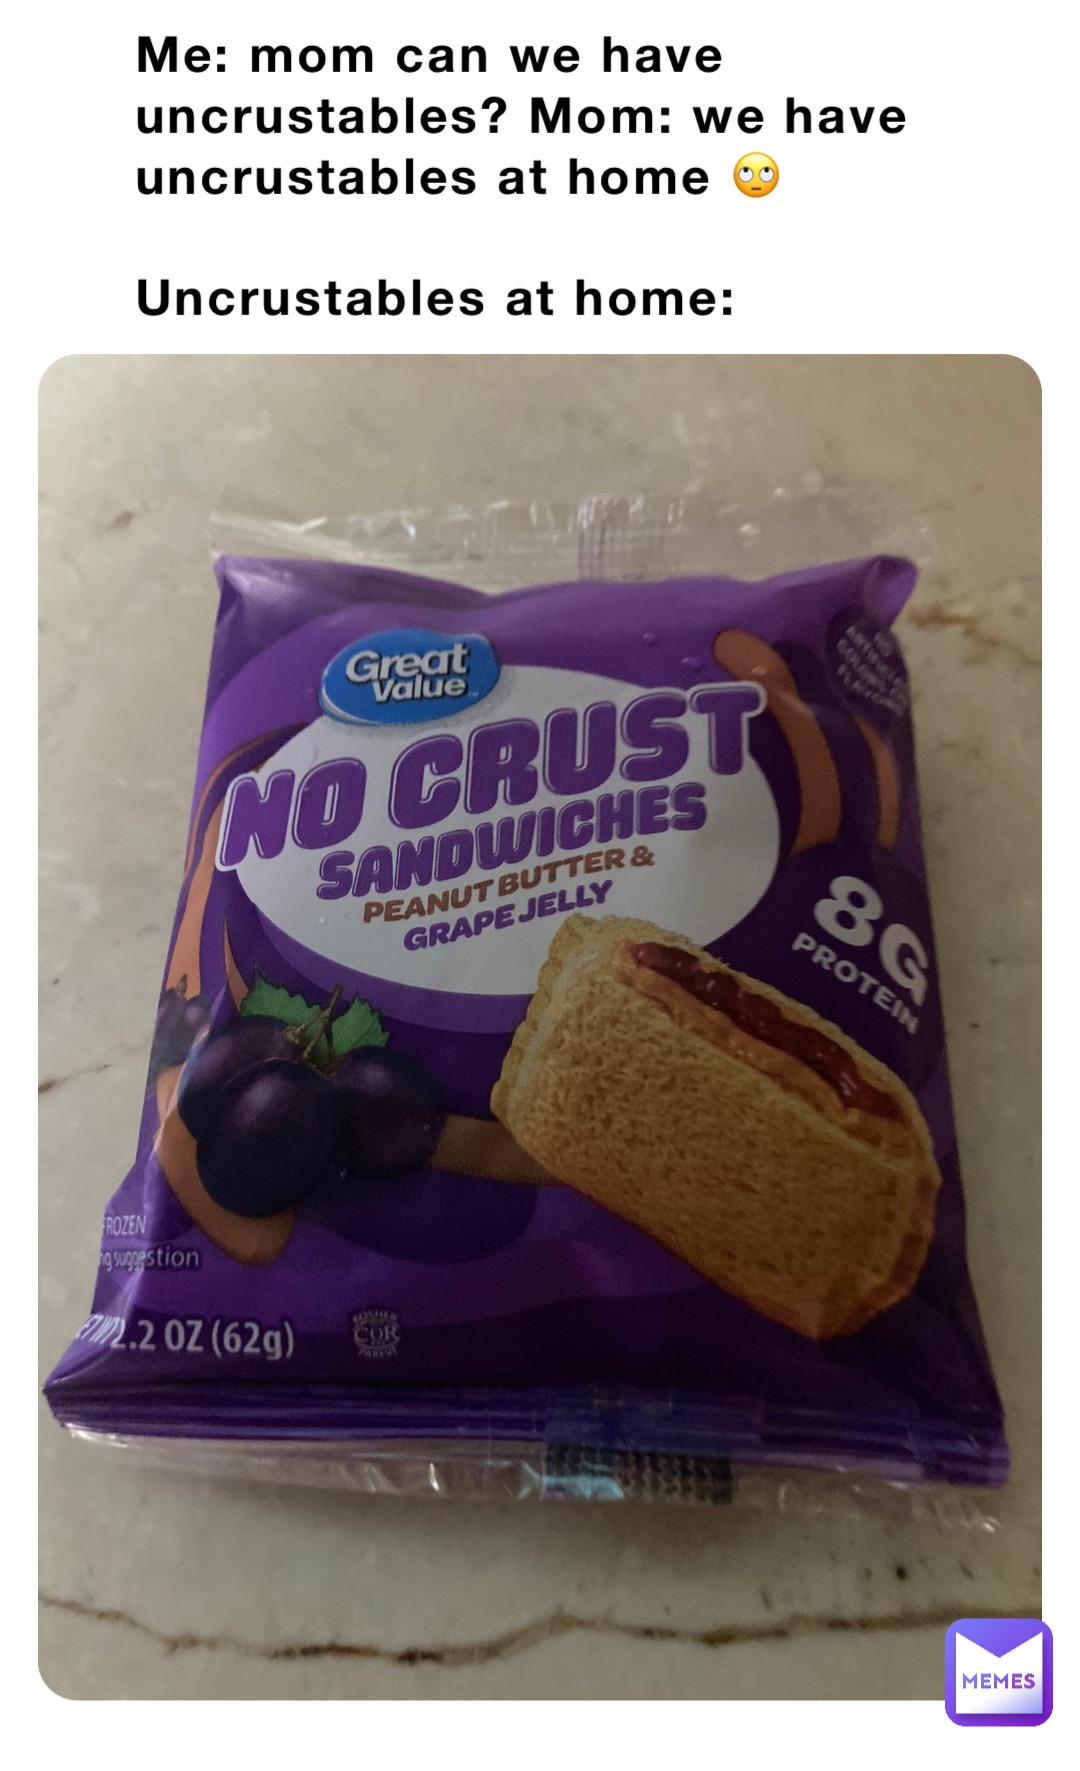 Me: mom can we have uncrustables? Mom: we have uncrustables at home 🙄 

Uncrustables at home: